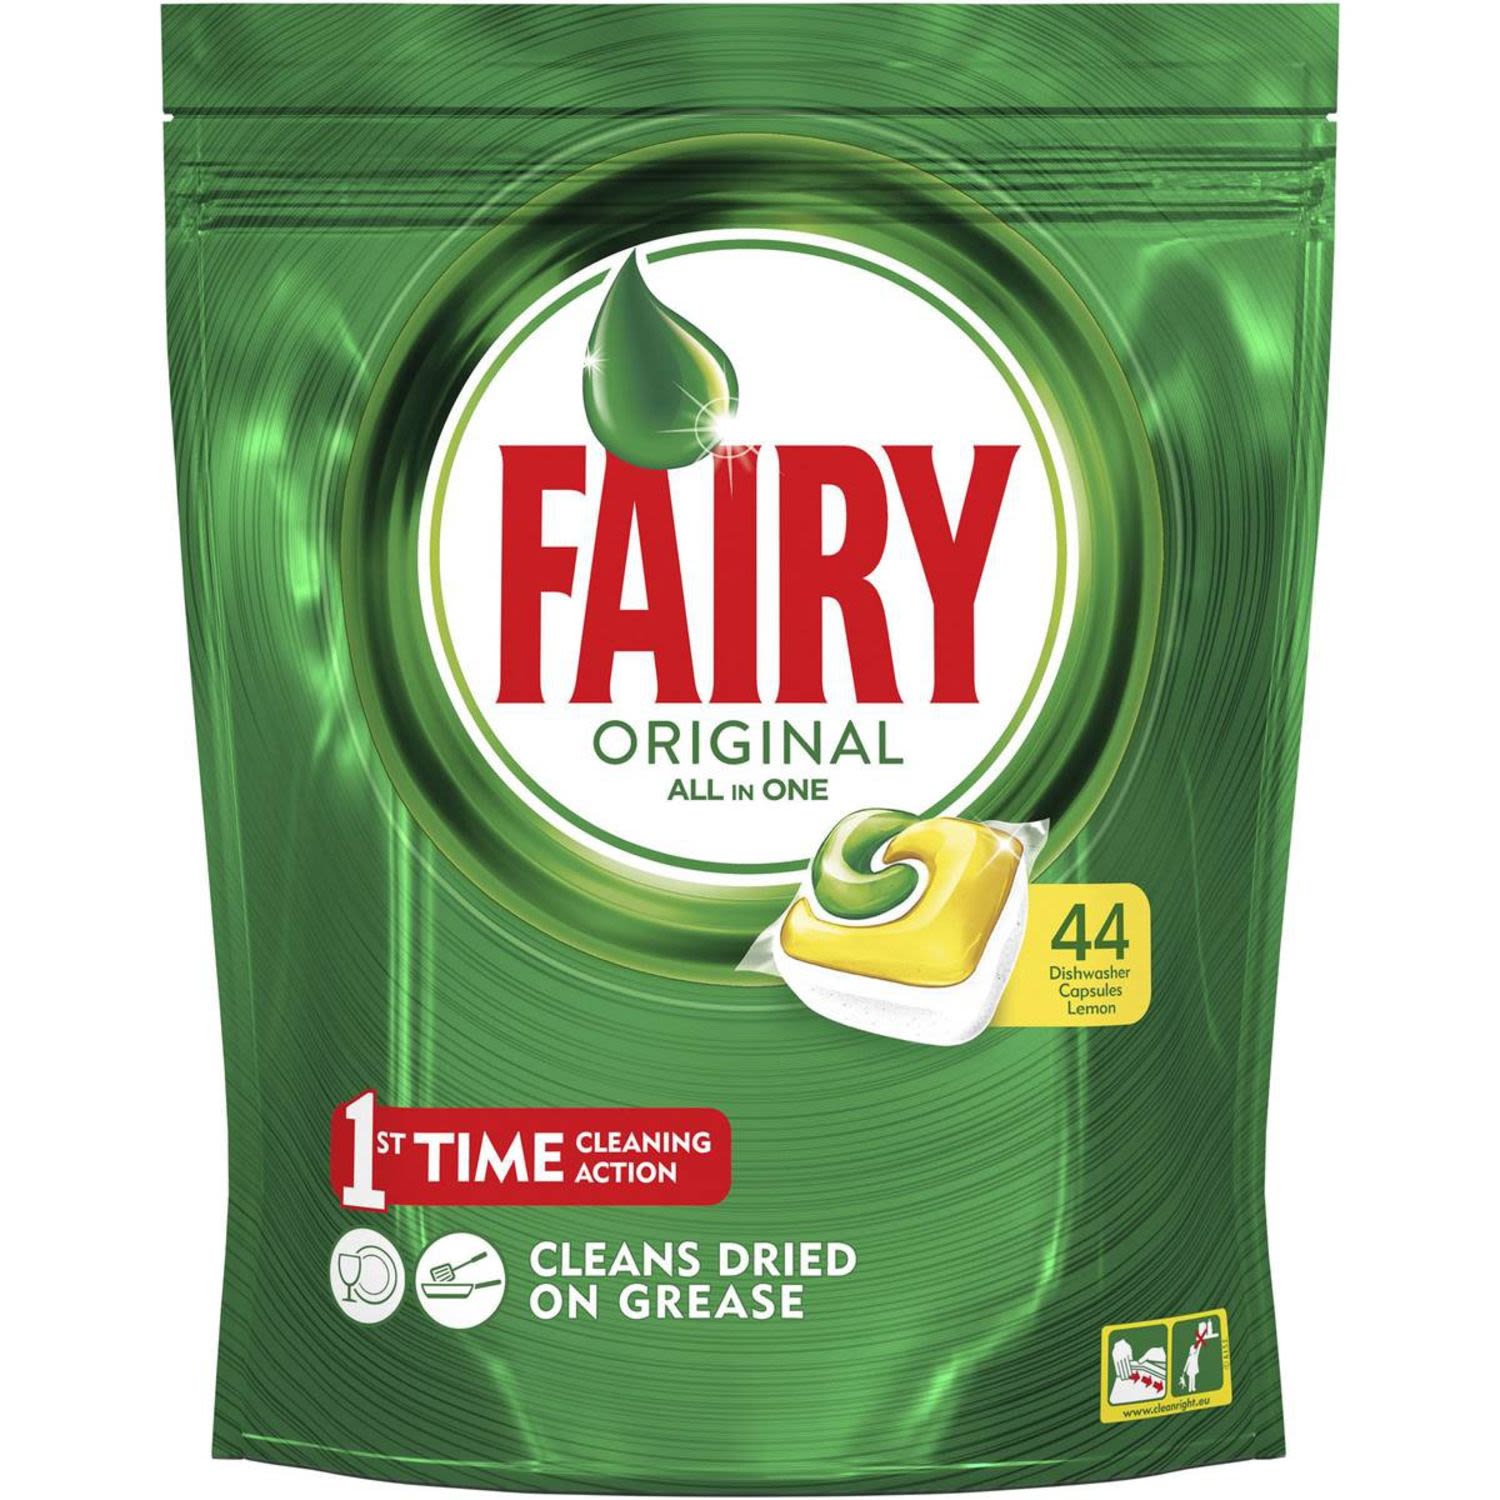 Fairy Dishwasher Tablets All In One Lemon, 44 Each